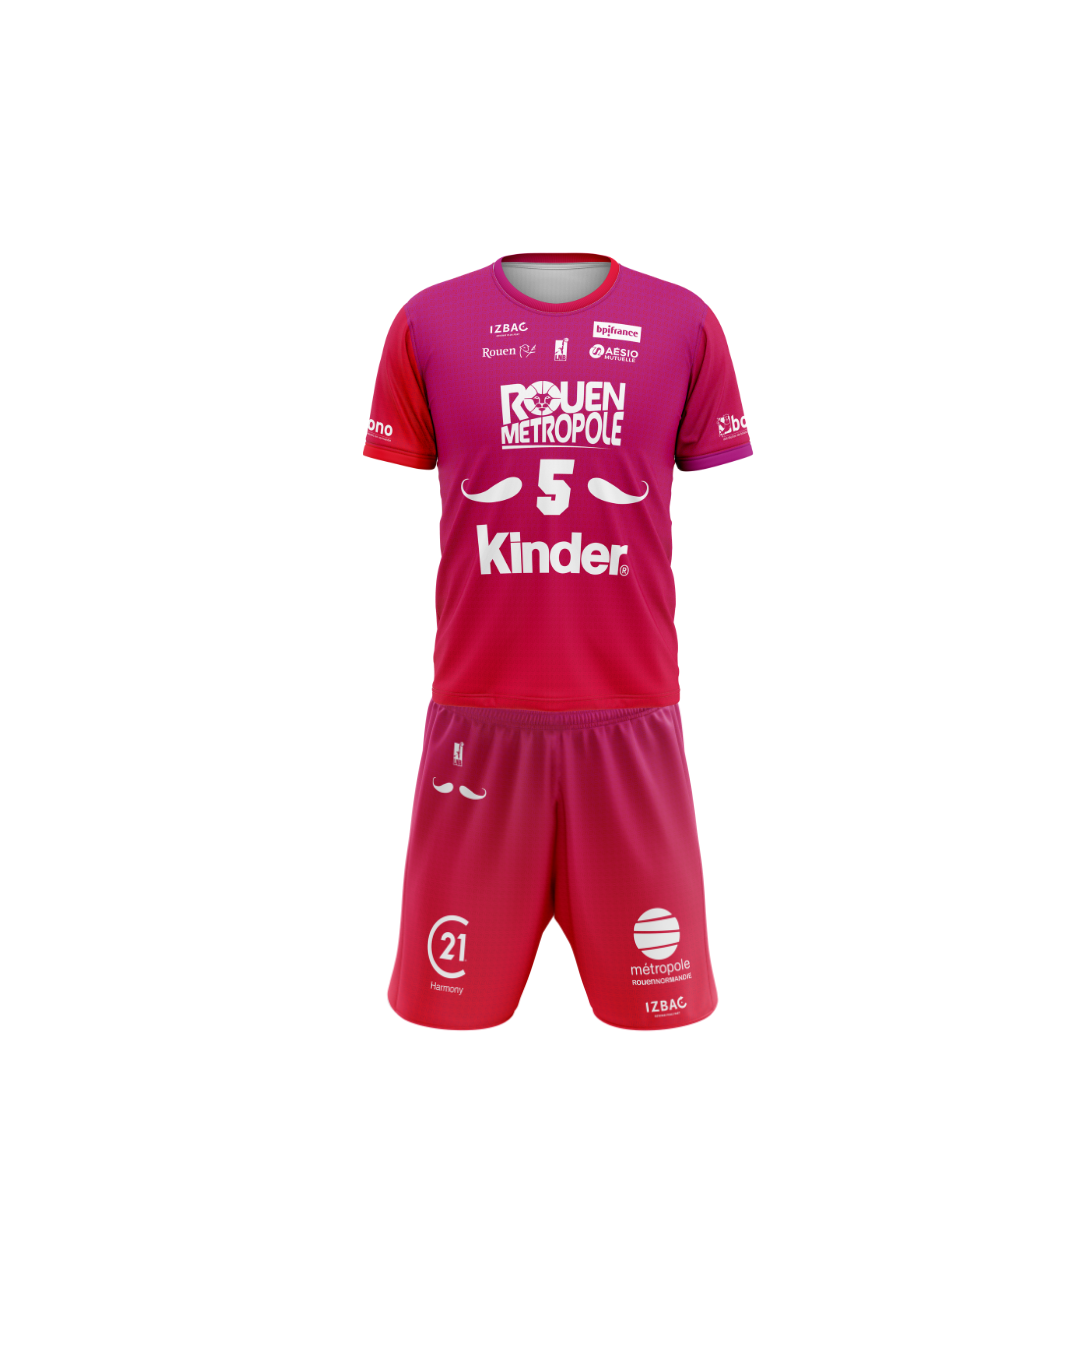 https://www.rouenmetrobasket.com/wp-content/uploads/2021/11/ANNONCE-MAILLOT-FERRE.png